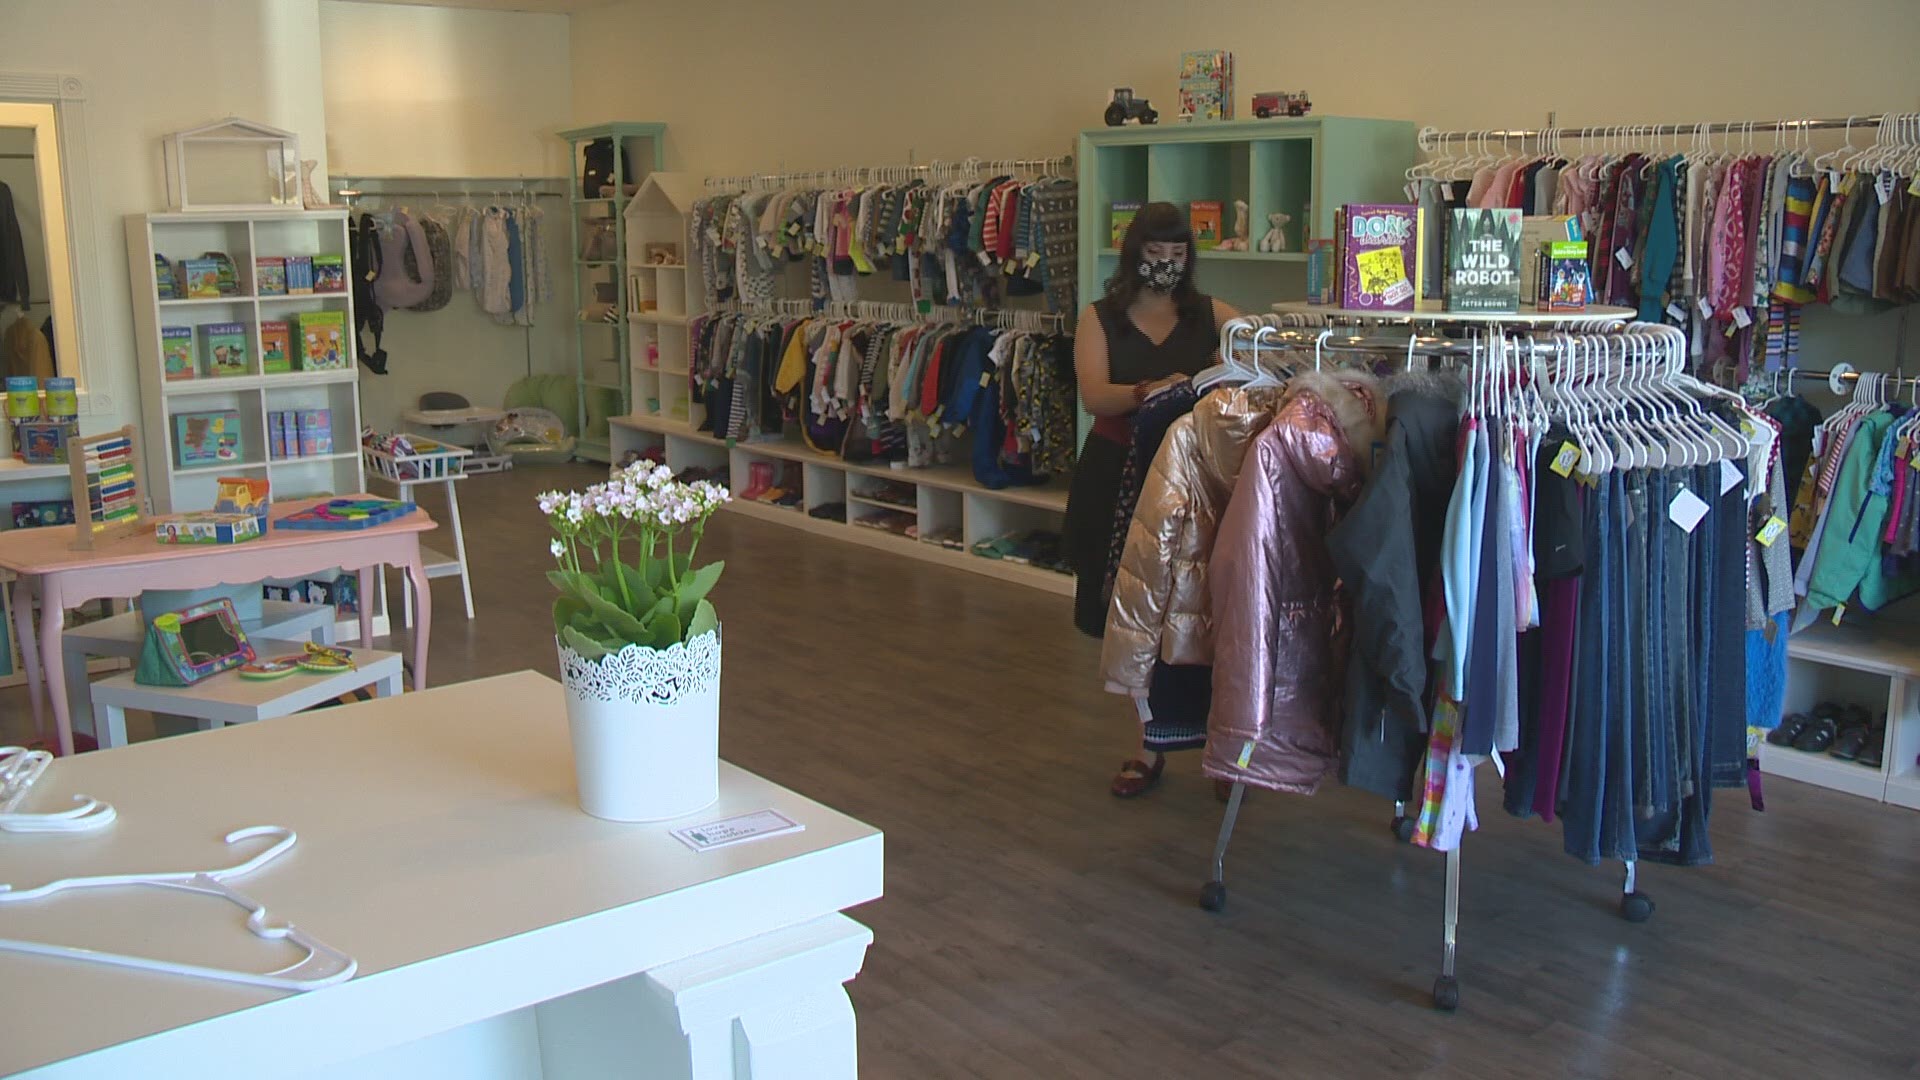 Resale boutique Hoot-n-Annie just opened up a new location in SW Portland. Owner Tina Donnaloia is staying true to her approach to help the community.